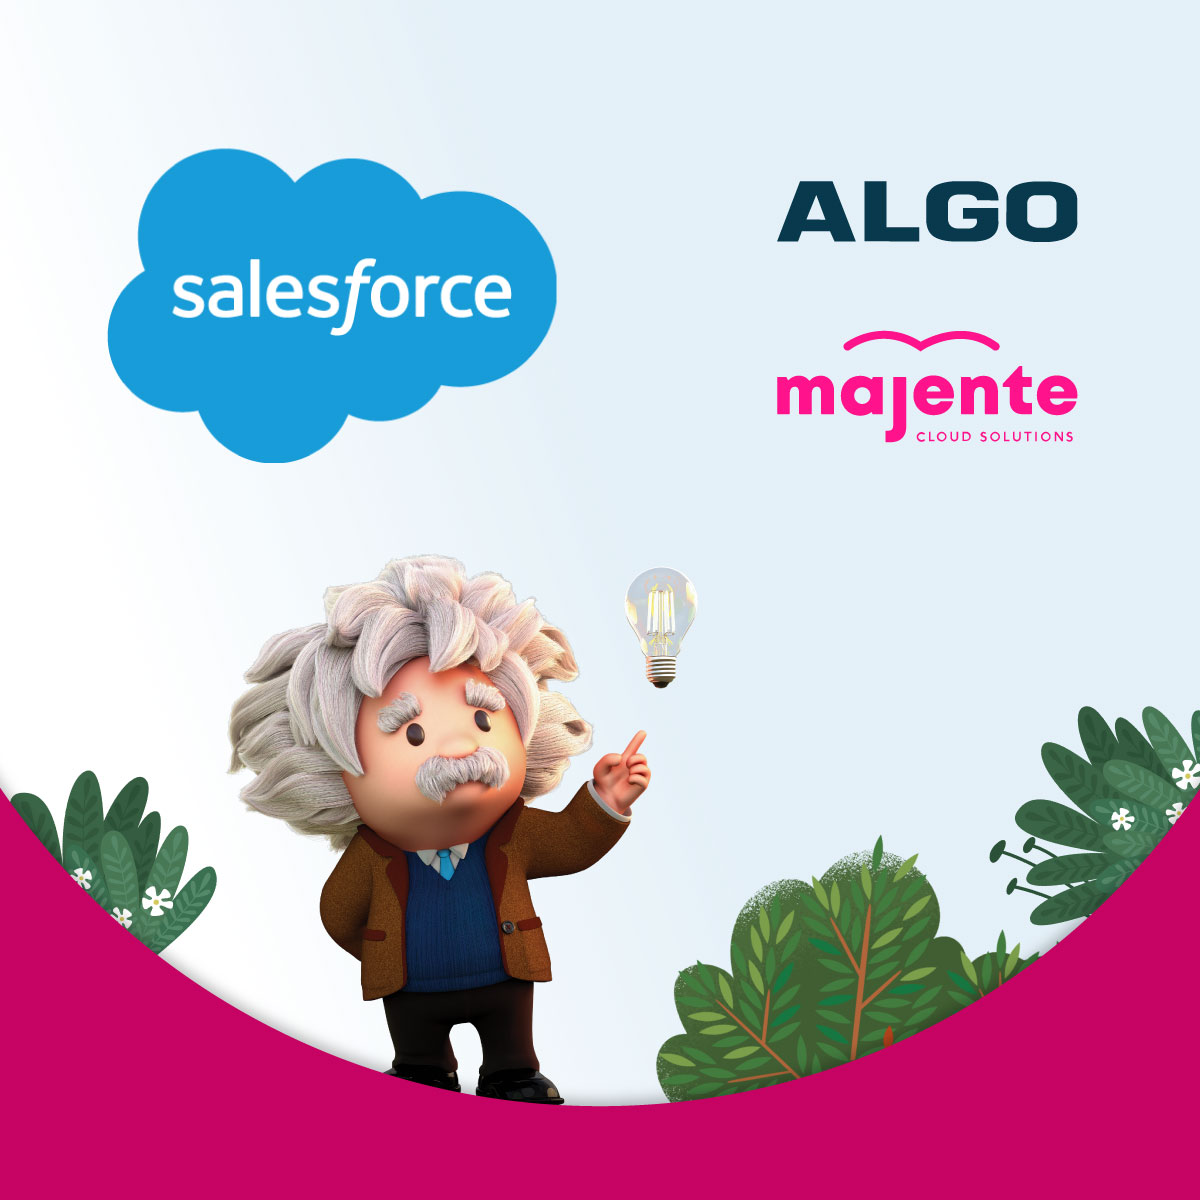 Majente Applauds Algo’s Success as the First Salesforce + AI Implementation to Go Live in Canada